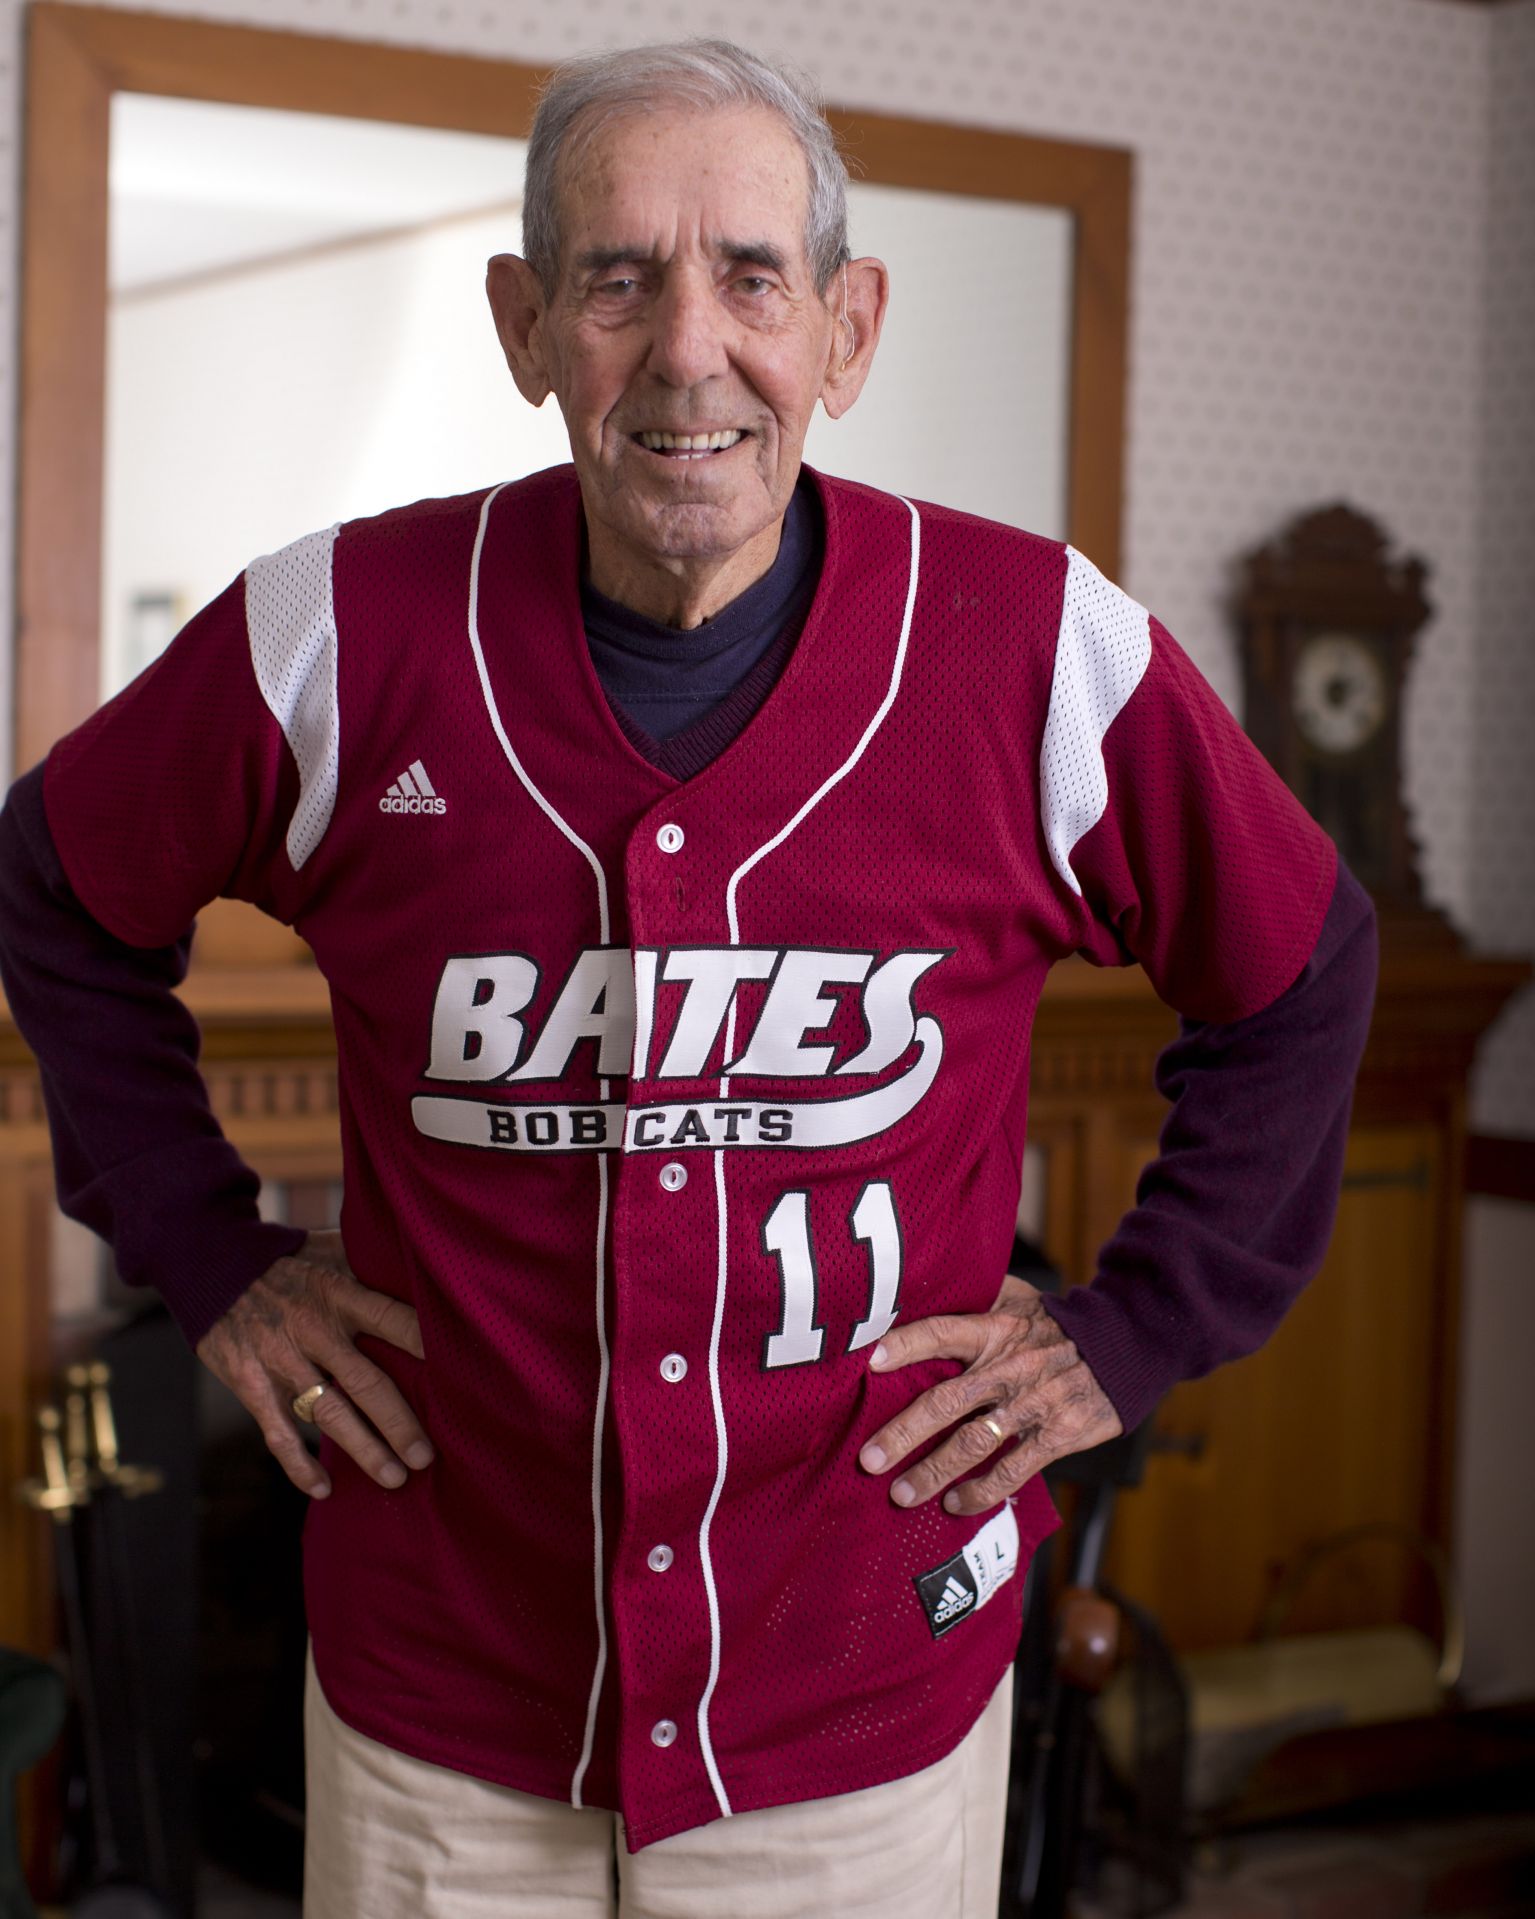 "I never got run."

-- William "Chick" Leahey '52, noting that in his half-century of organized
baseball, including high school, minor league, semi-pro, and 36 years
as a head coach of Bates baseball, he never got tossed from a game by
an umpire.

Photographed at his home at 385 East Avenue, Lewiston, wife his wife, Ruth.